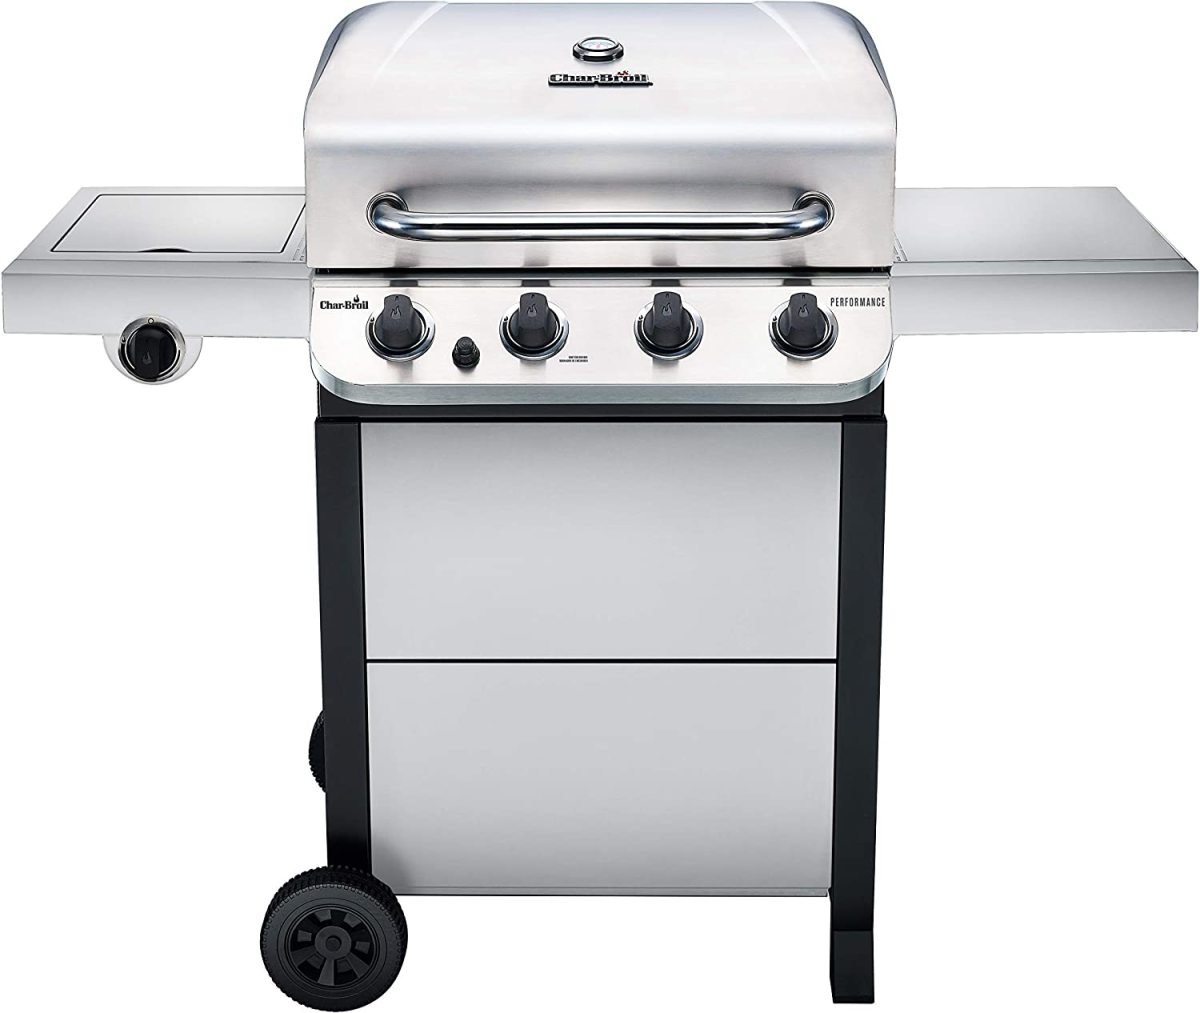 The Char-Broil 463377319 Performance 4-Burner Cart Style Liquid Propane Gas Grill.